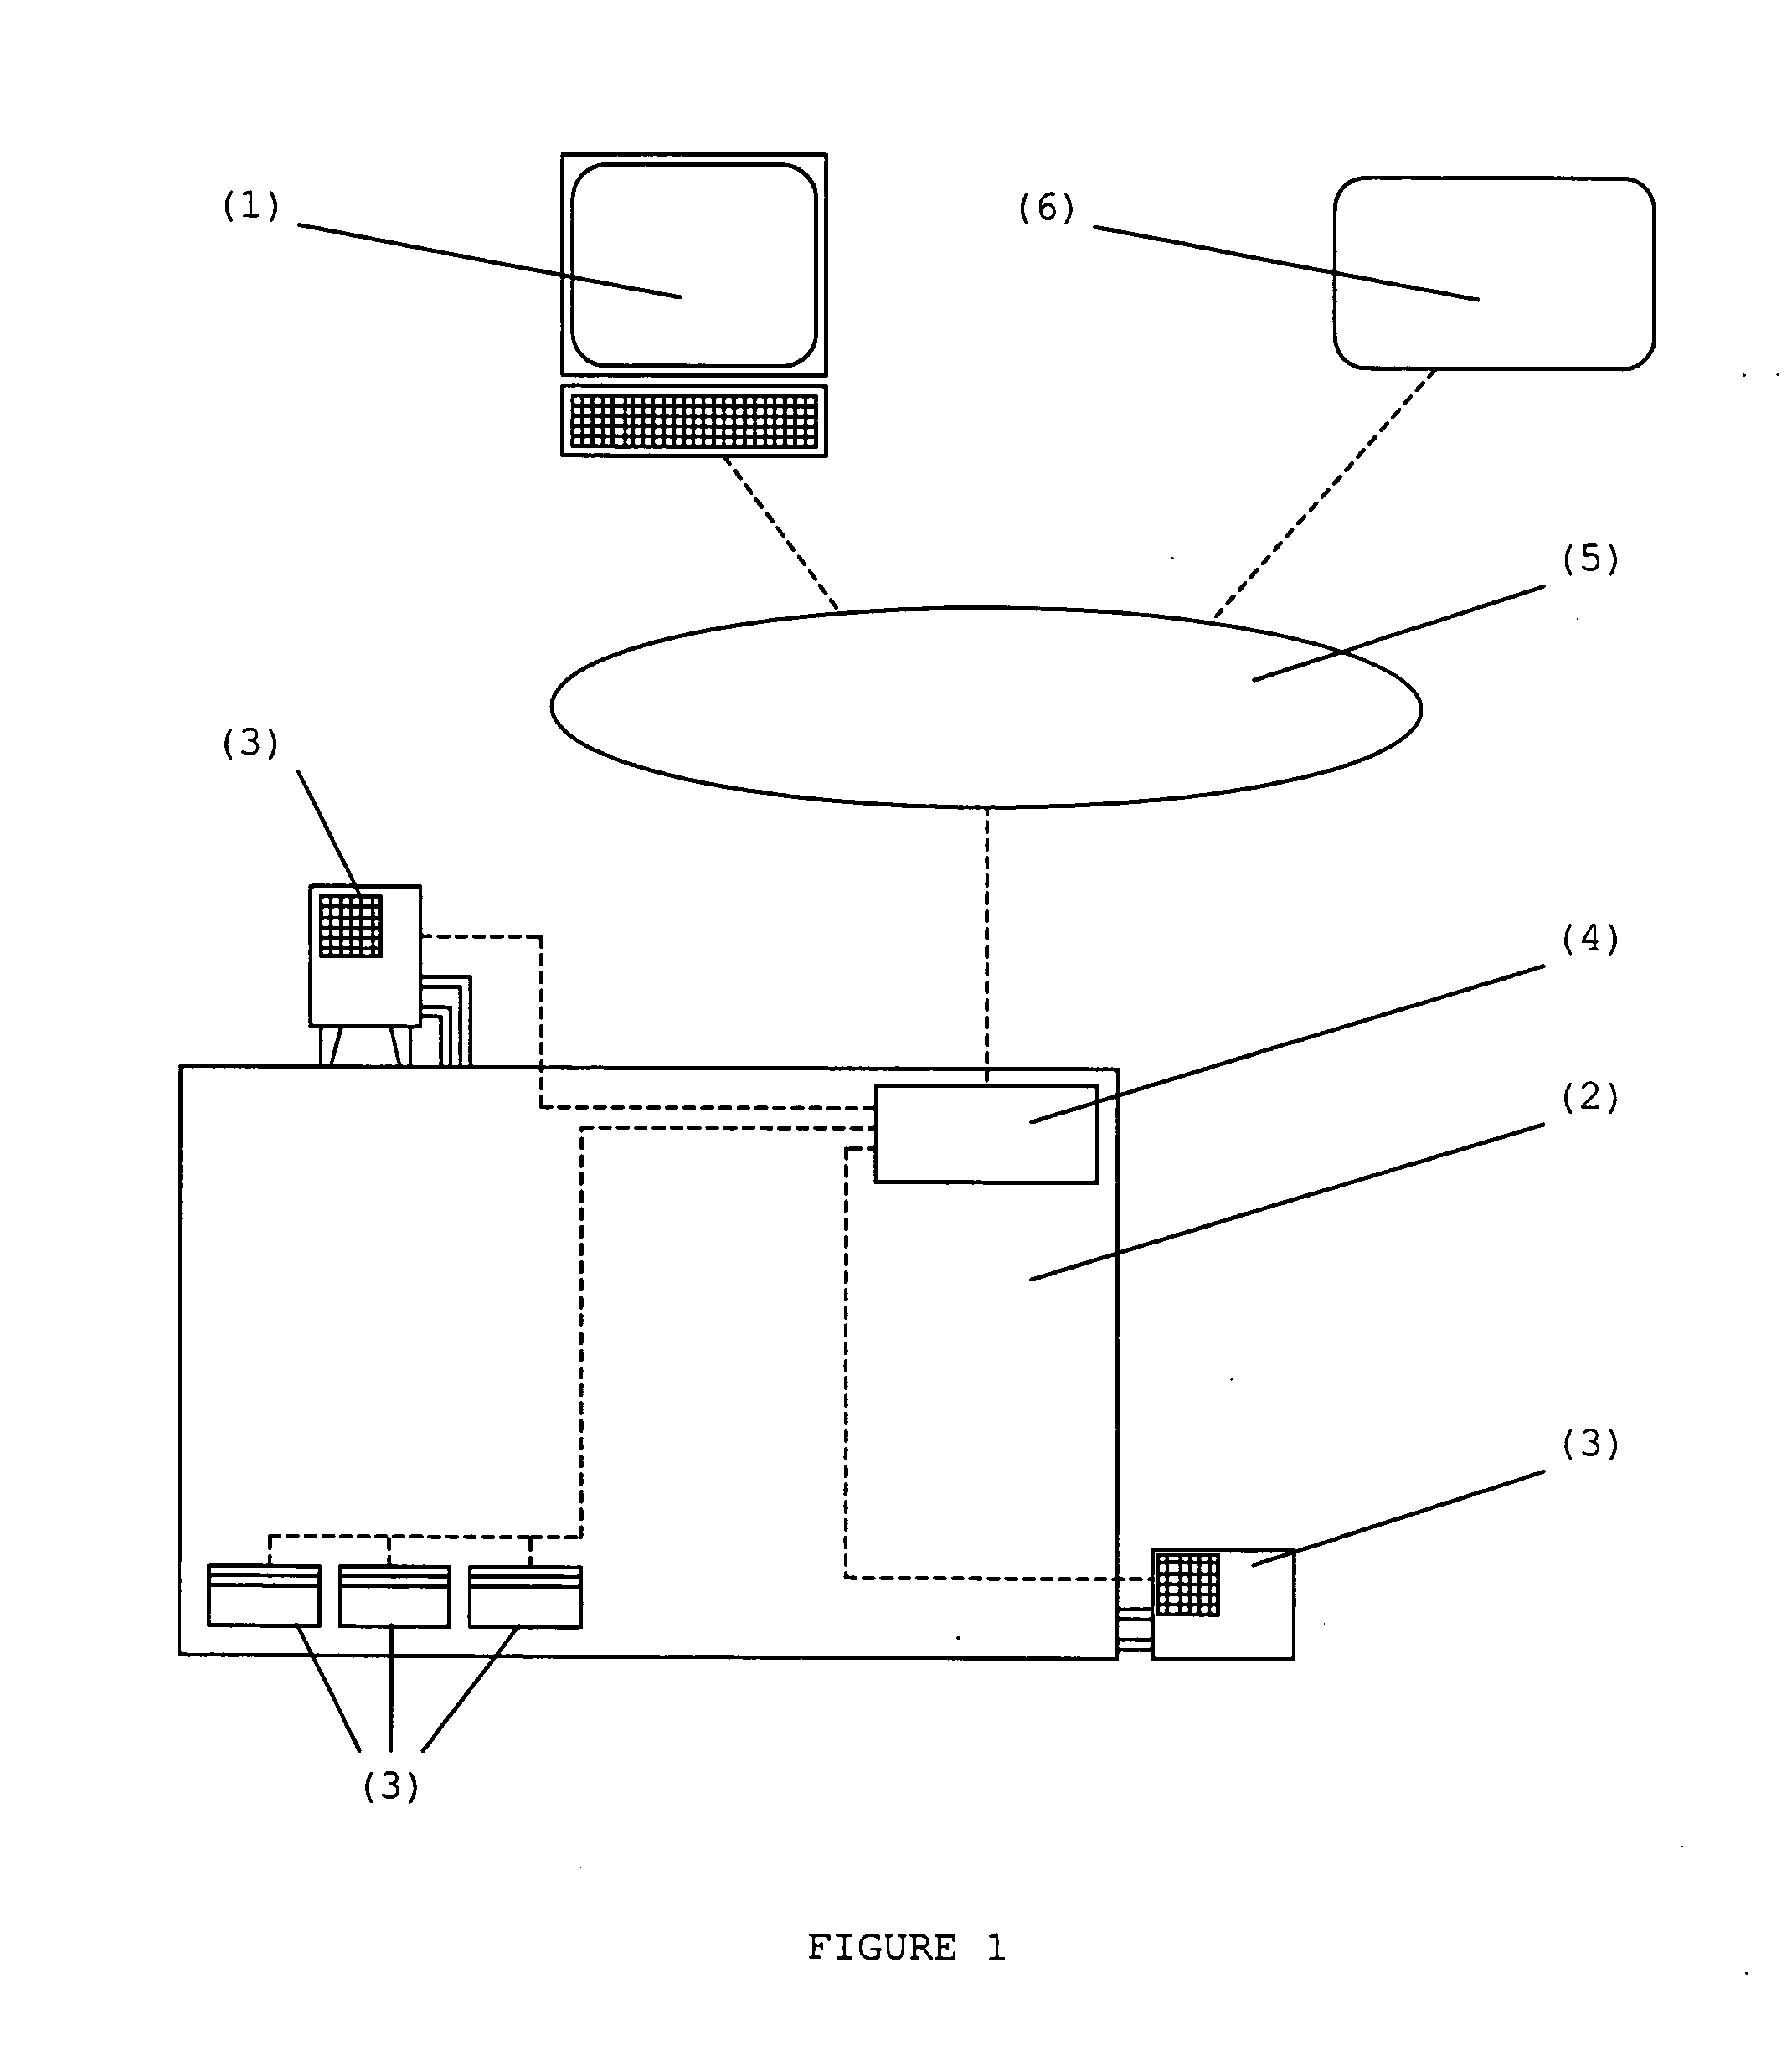 System and method of controlling environmental conditioning equipment in an enclosure